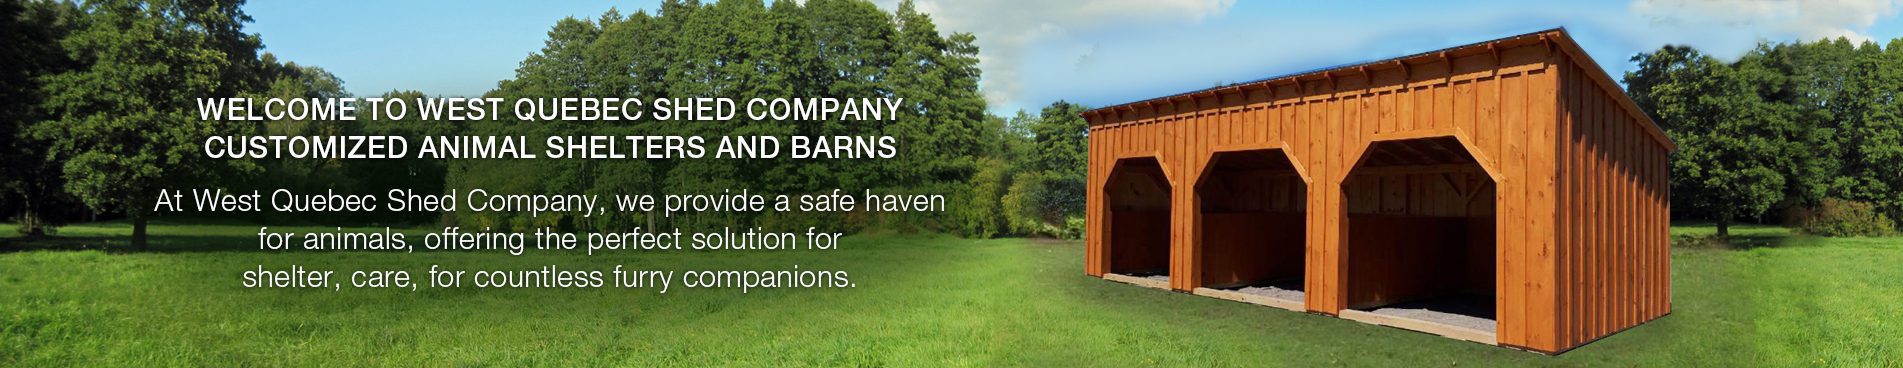 Welcome to West Quebec Shed Company Customized Animal Shelters and Barns